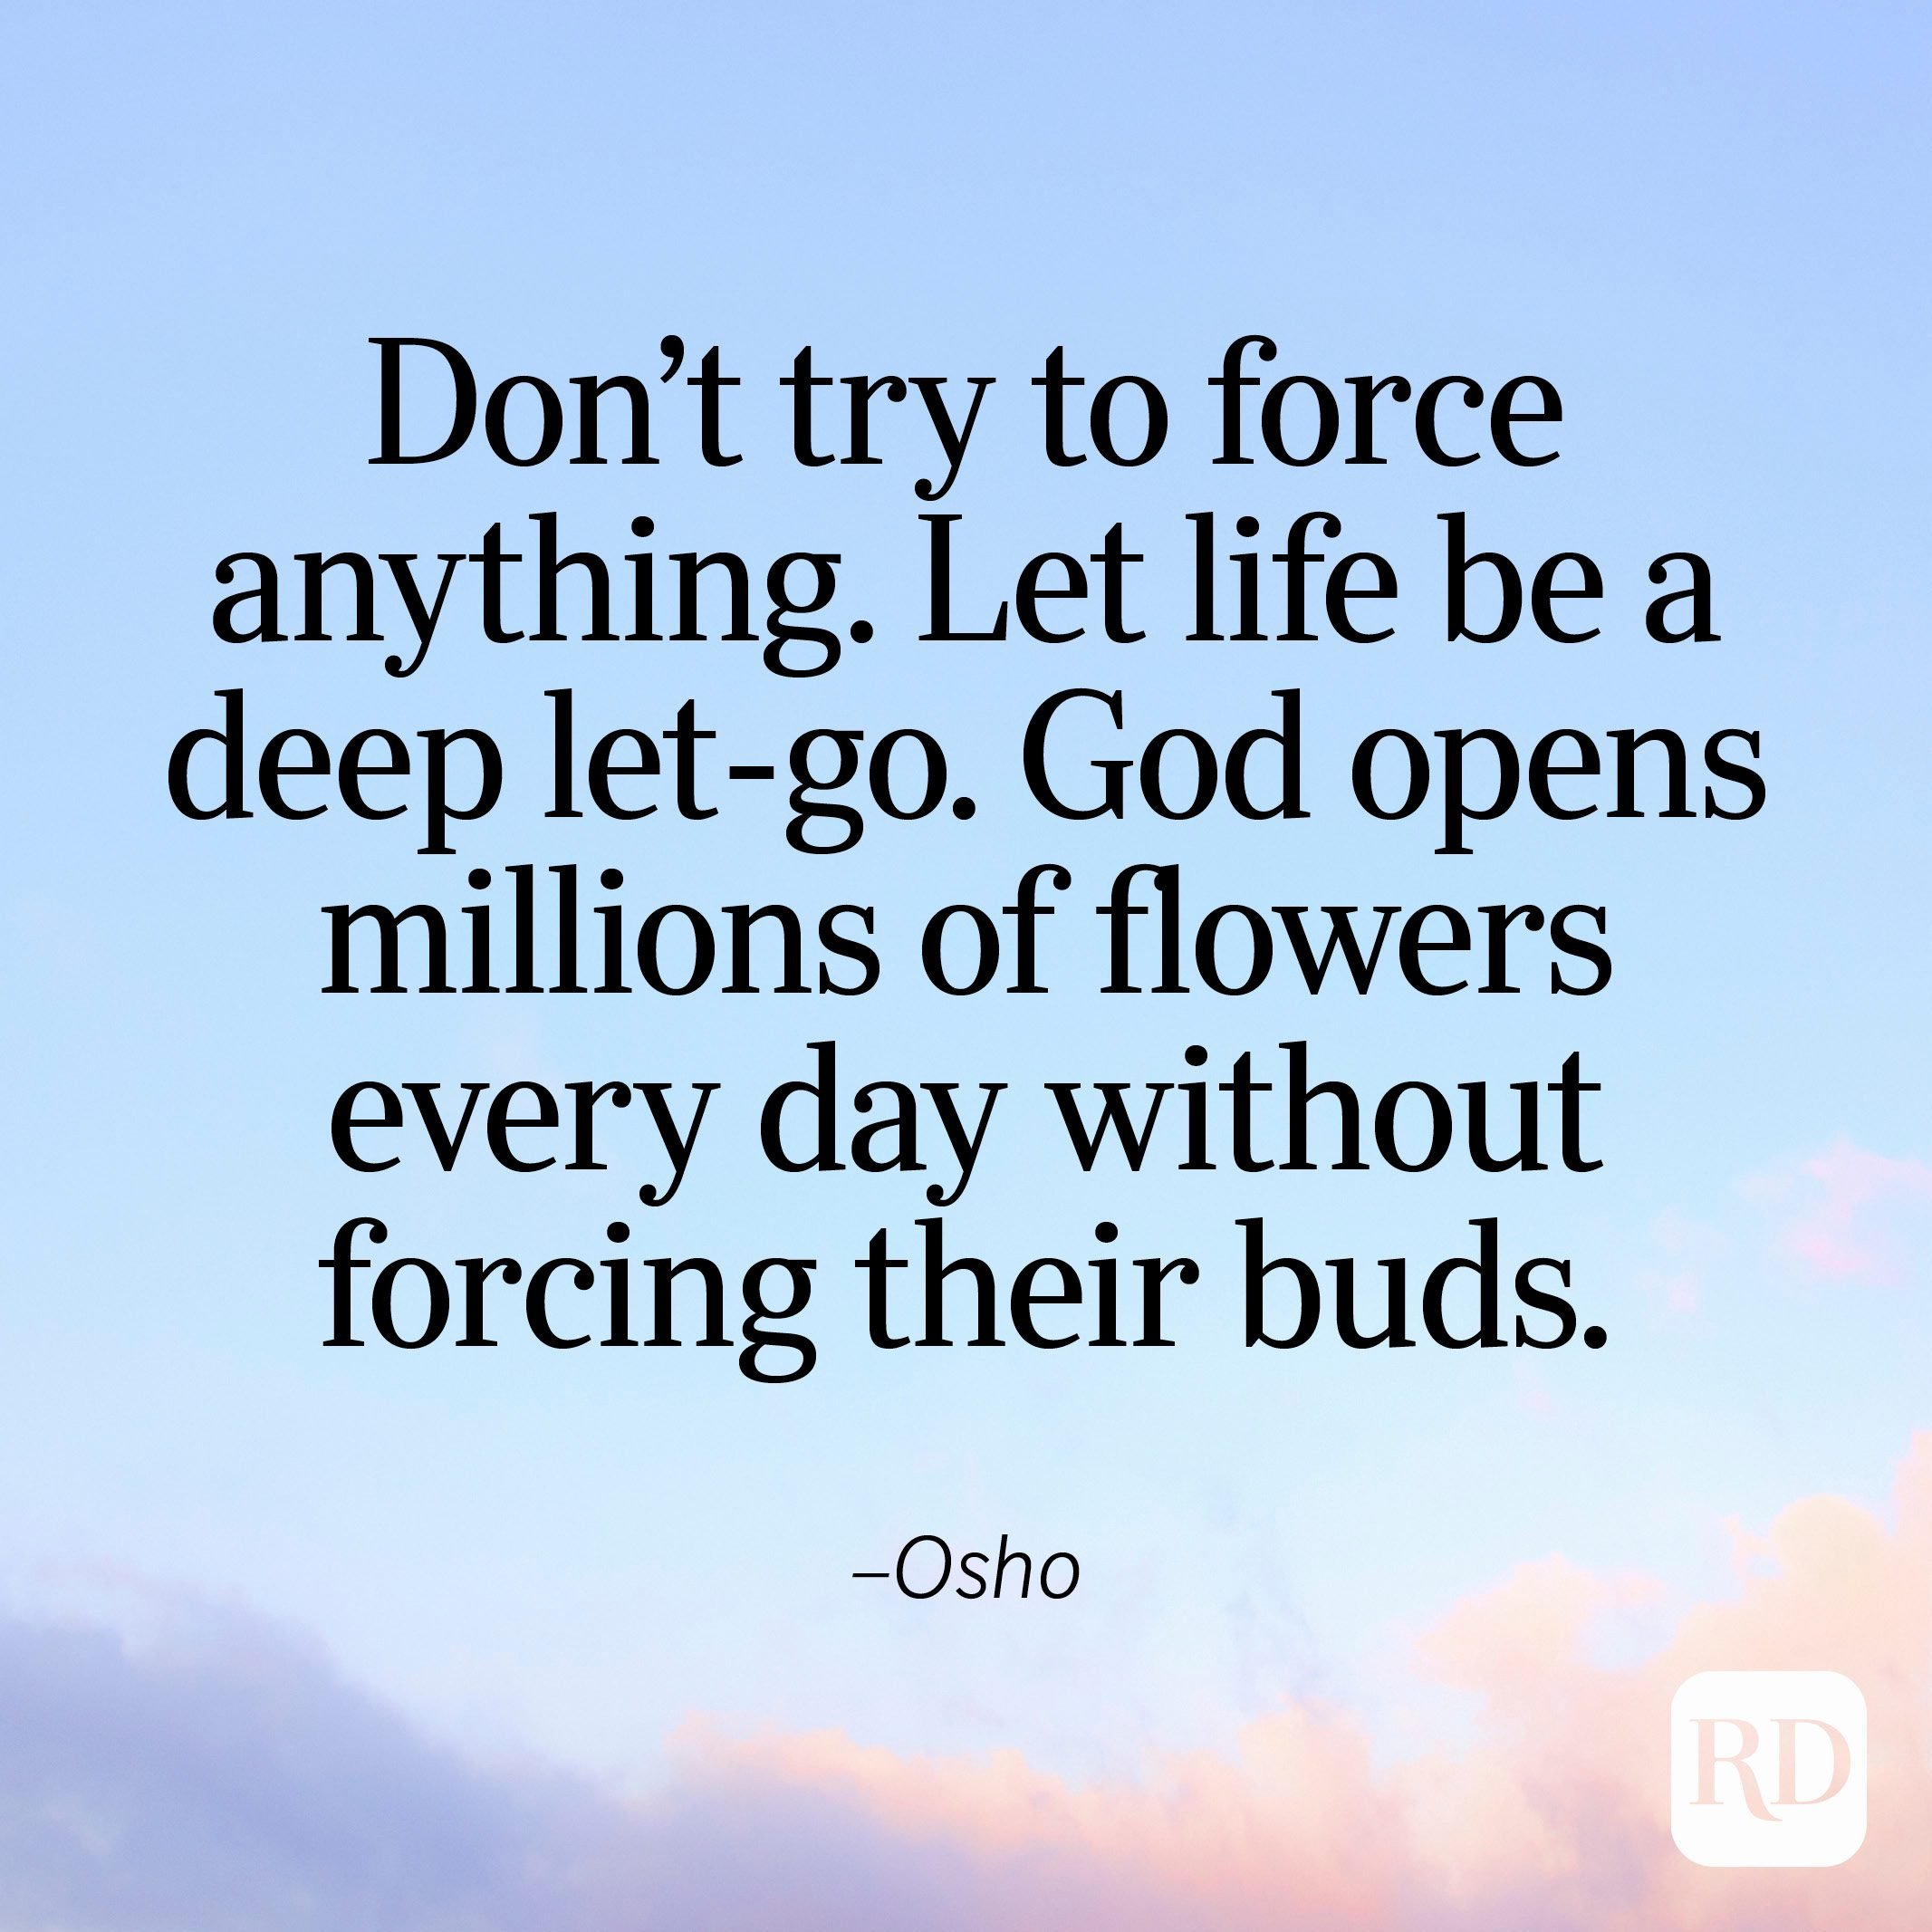 "Don't try to force anything. Let life be a deep let-go. God opens millions of flowers every day without forcing their buds." —Osho